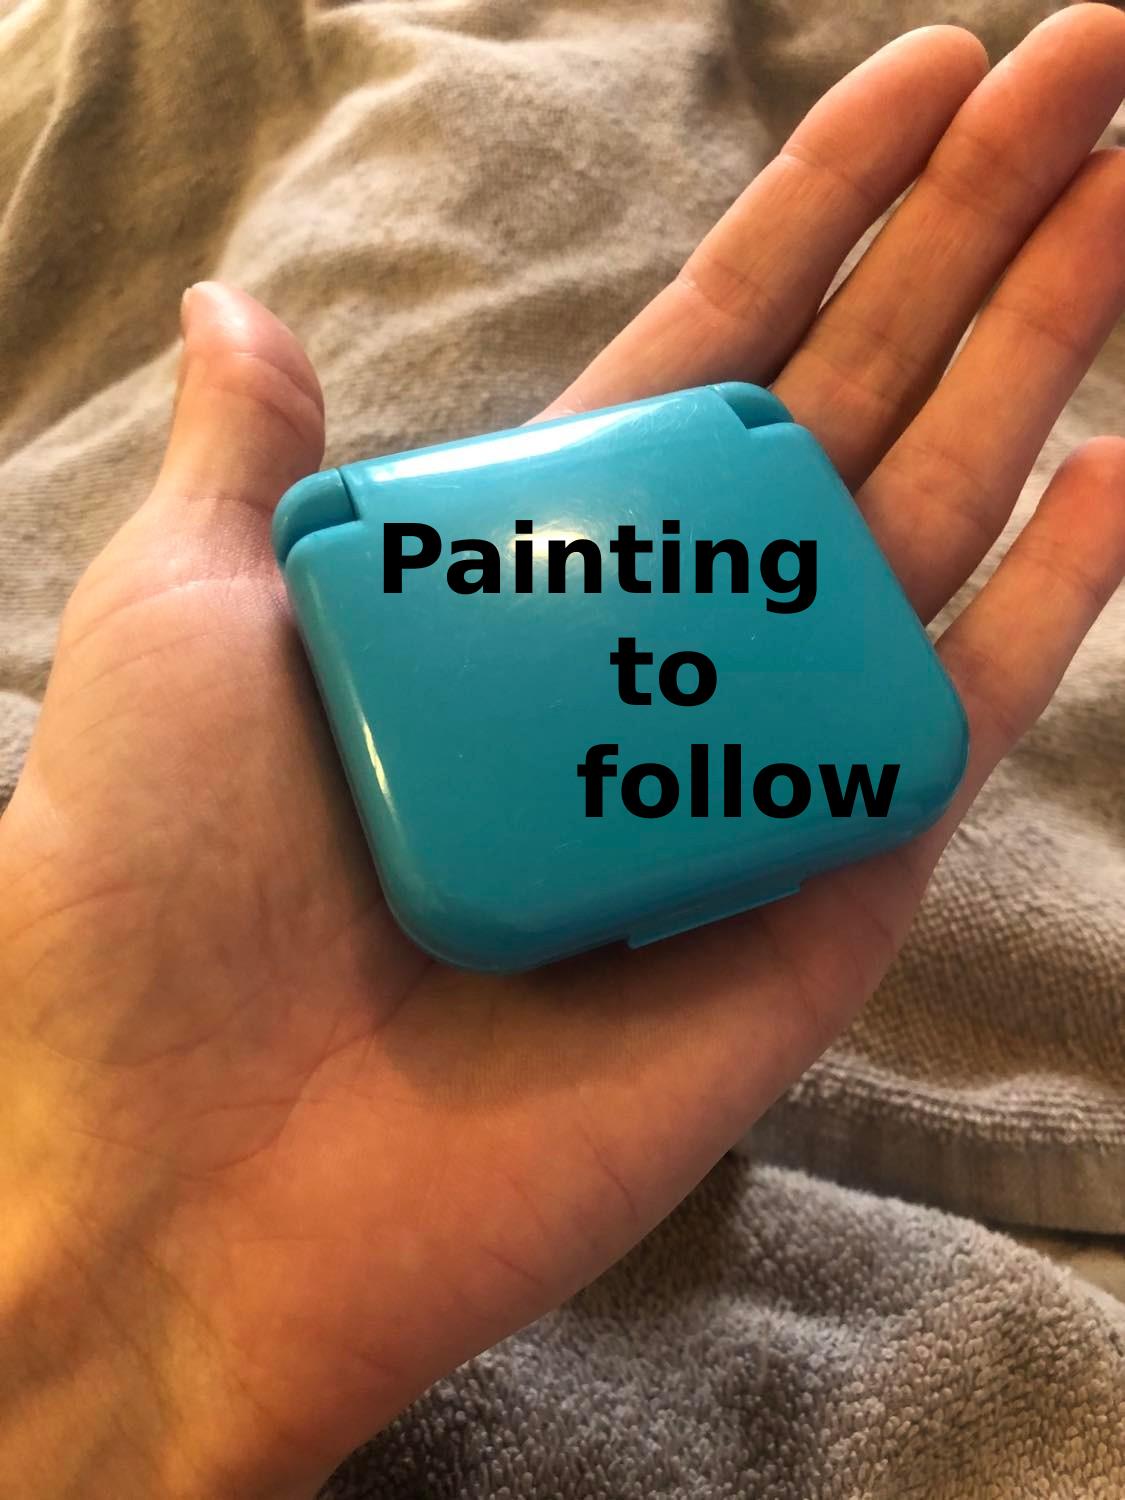 It says 'painting to follow' on top of that closed dice case picture.